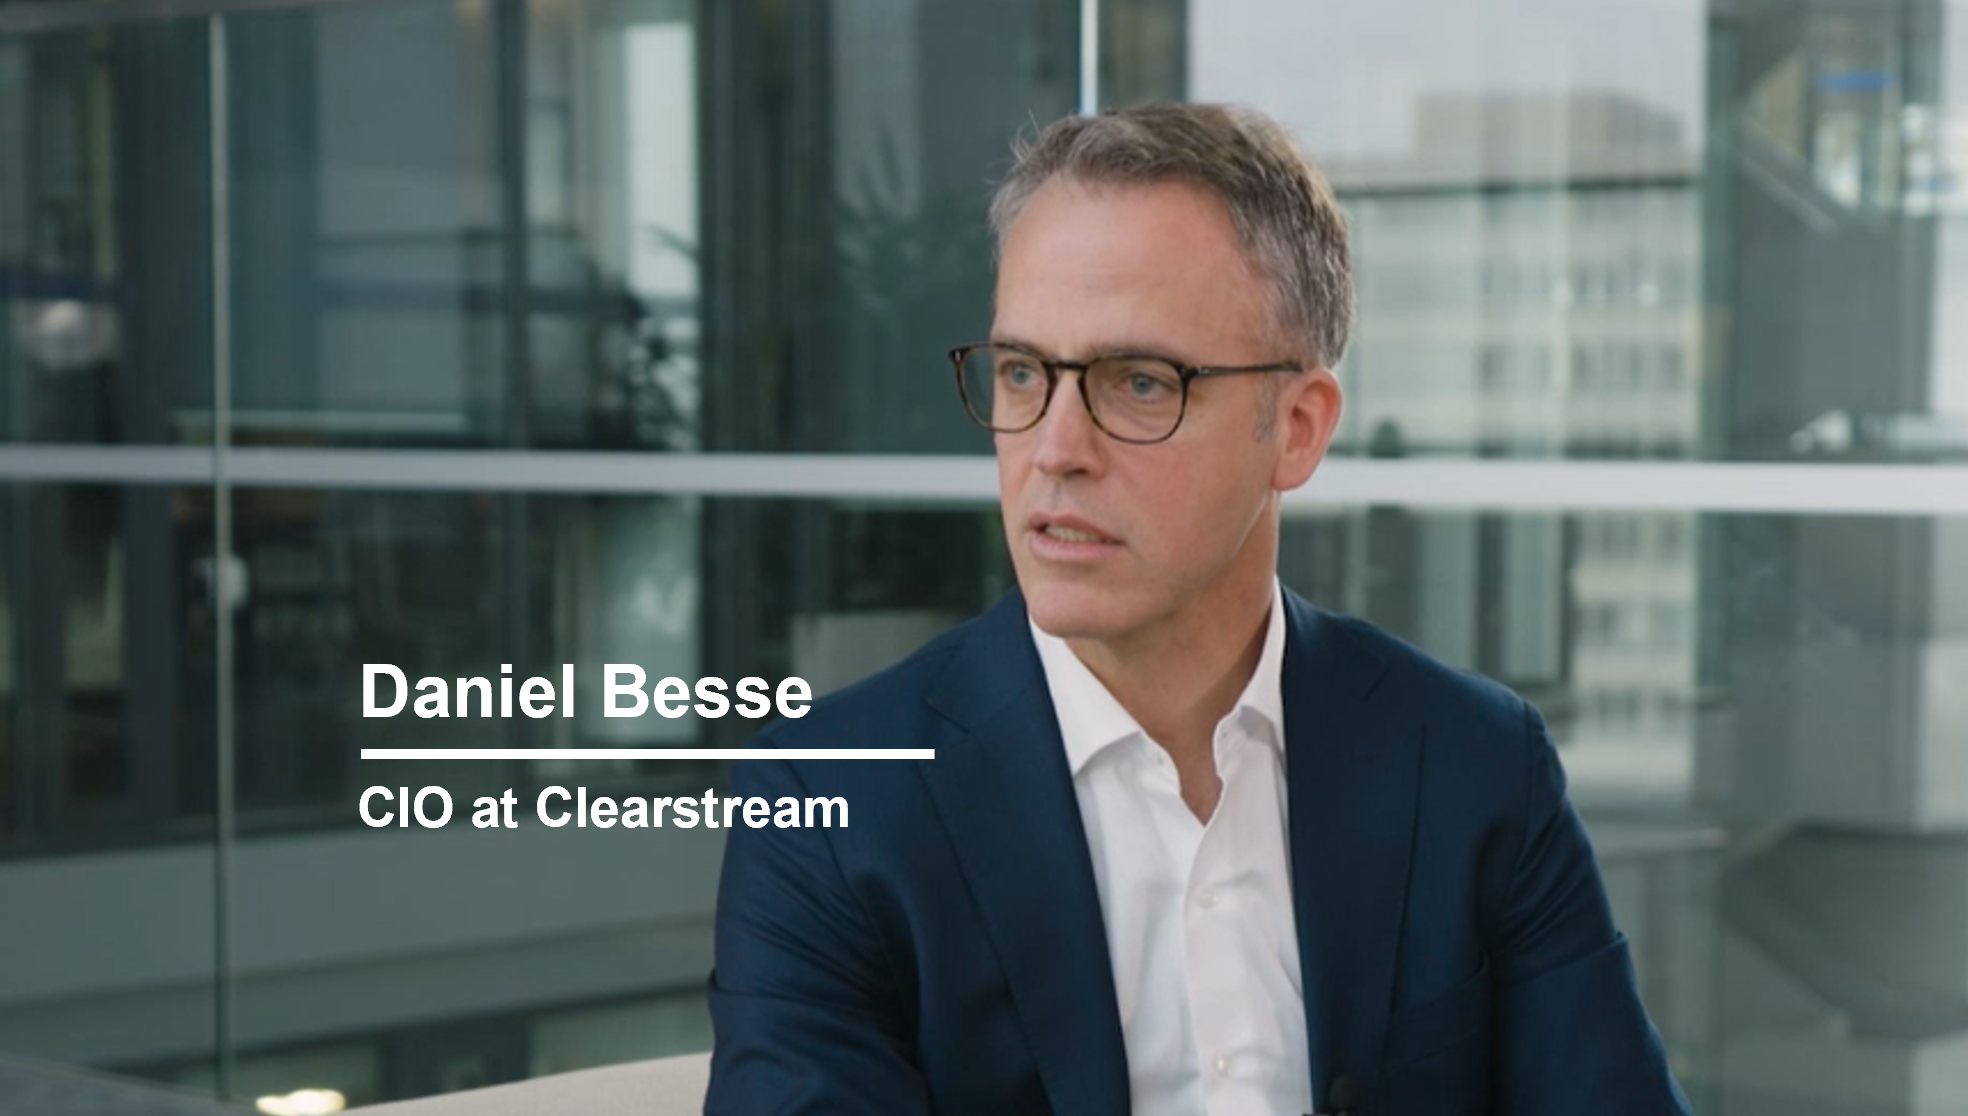 Middle-aged man in glasses and a navy suit sitting in an office setting, with the name "daniel besse" and title "cio at clearstream" displayed.